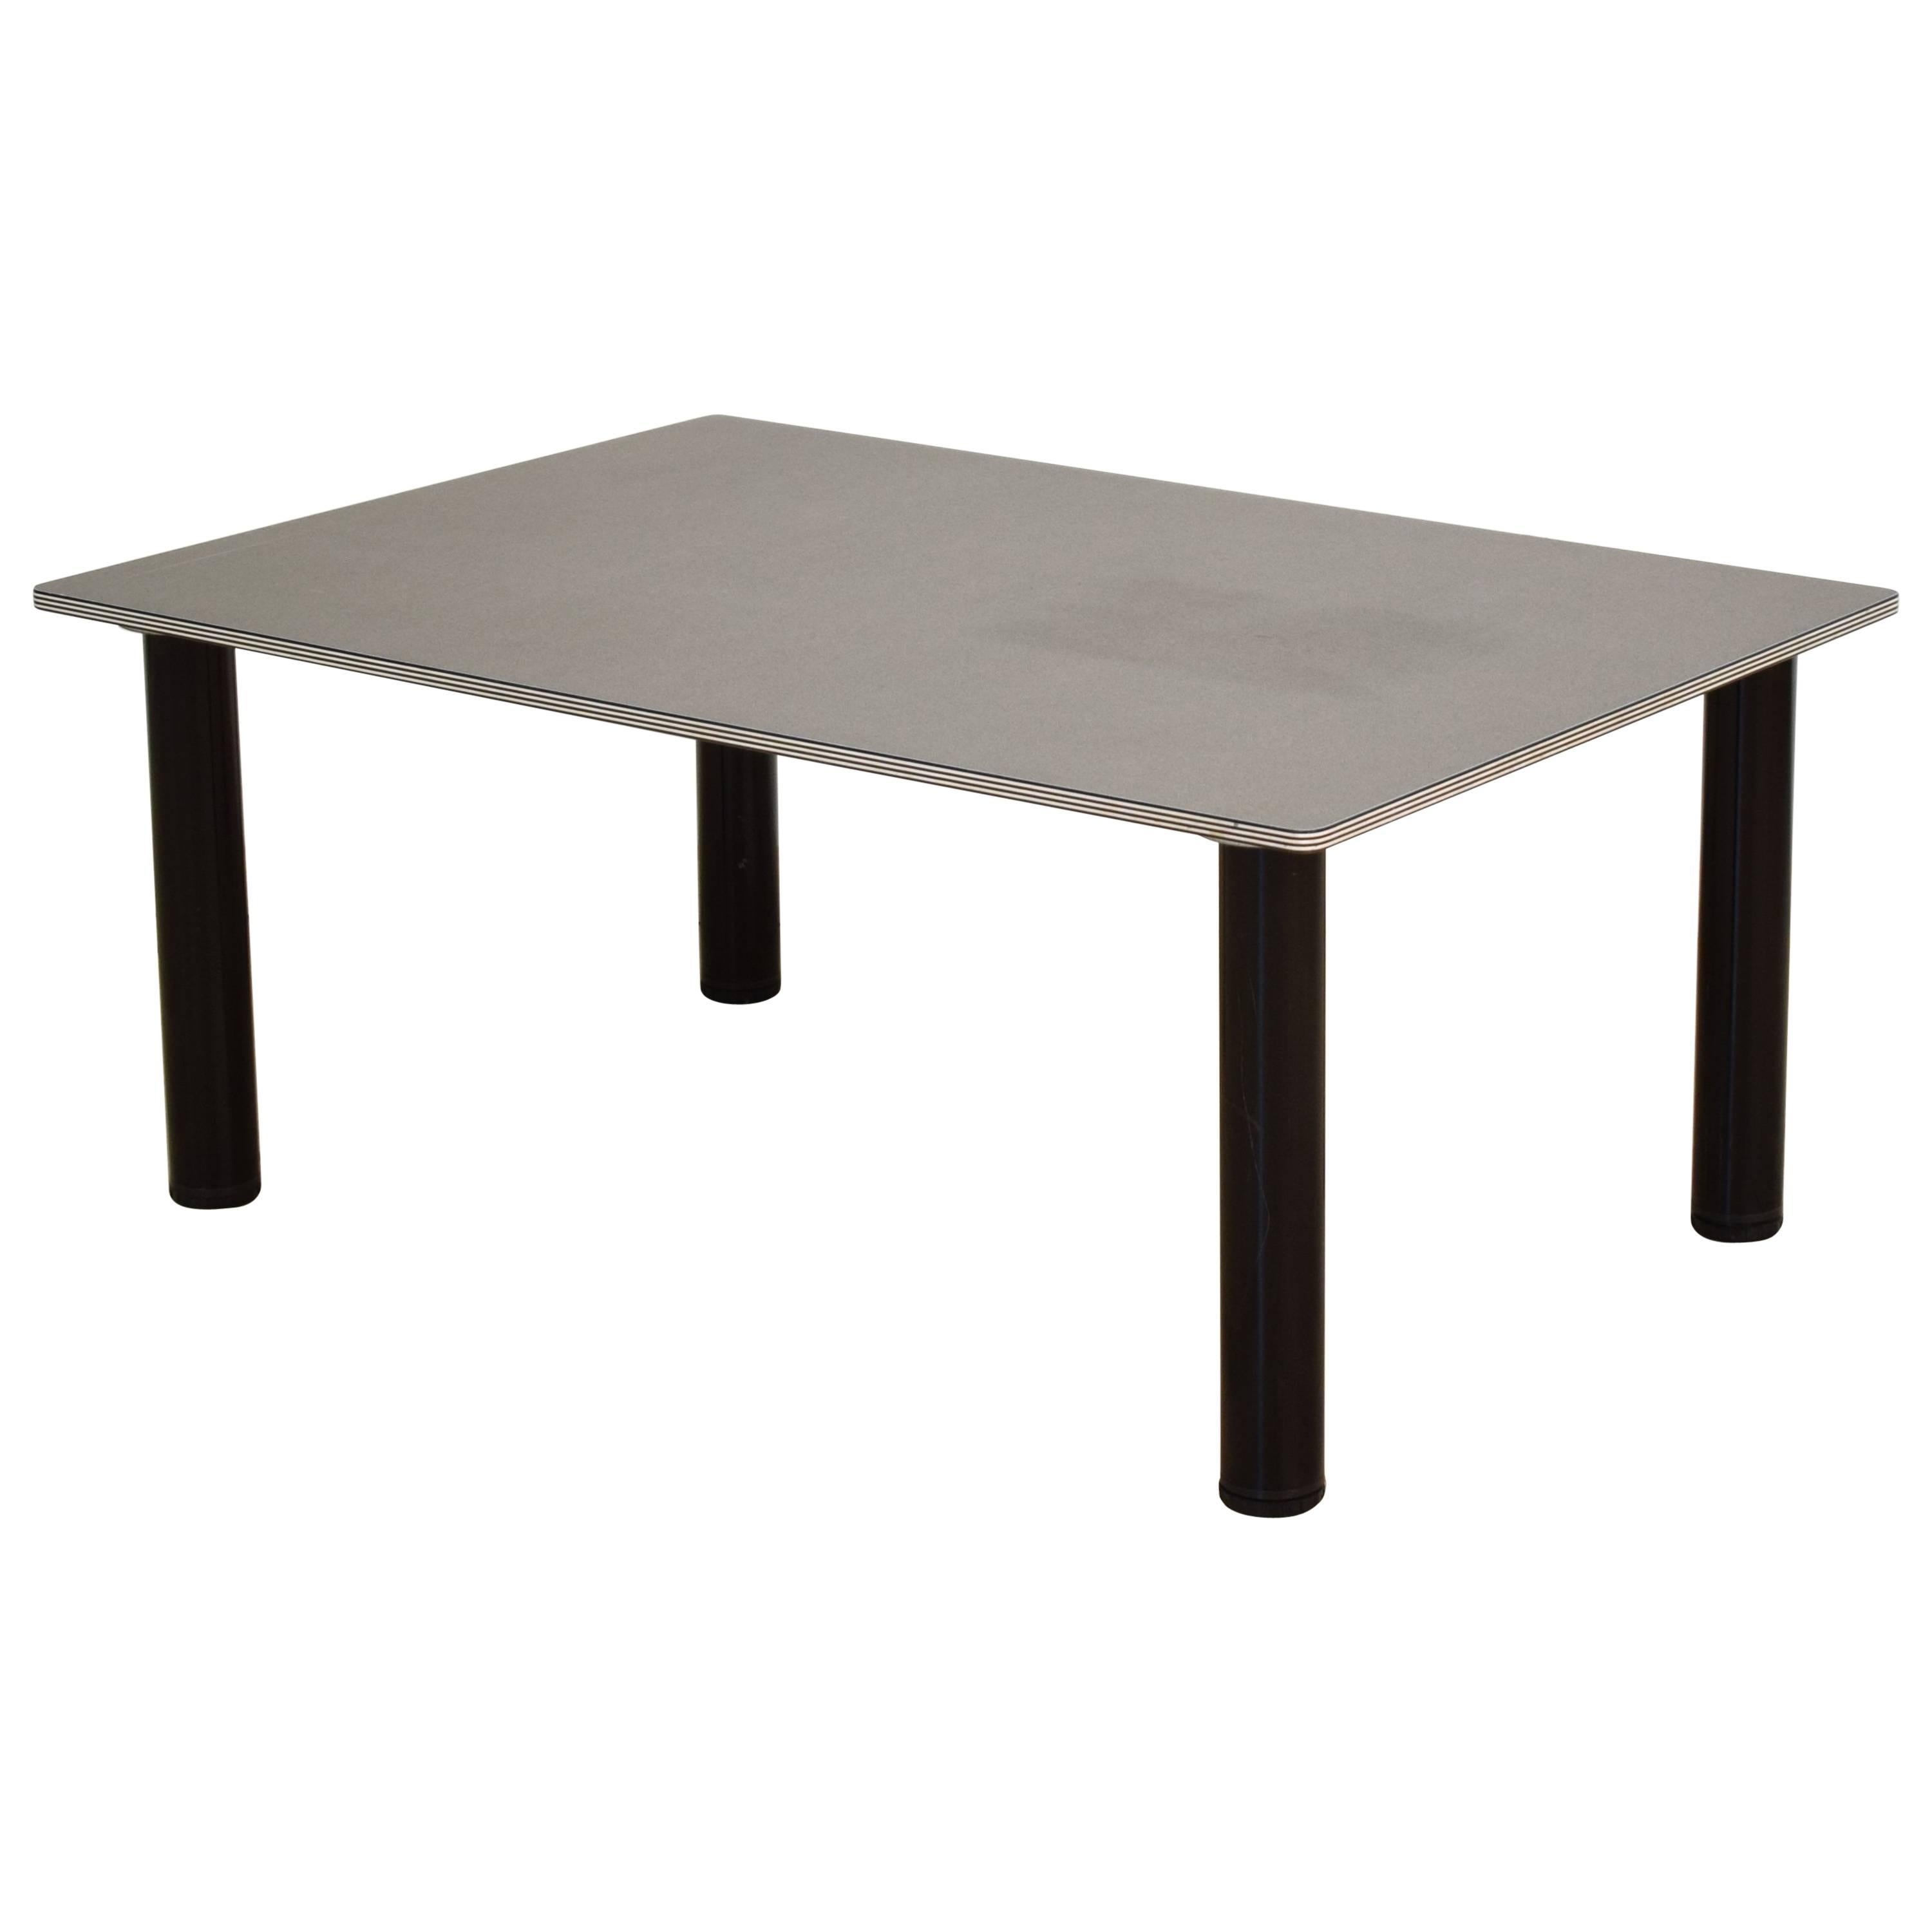 1980s Postmodern Memphis Group Coffee Table in Black and Grey For Sale